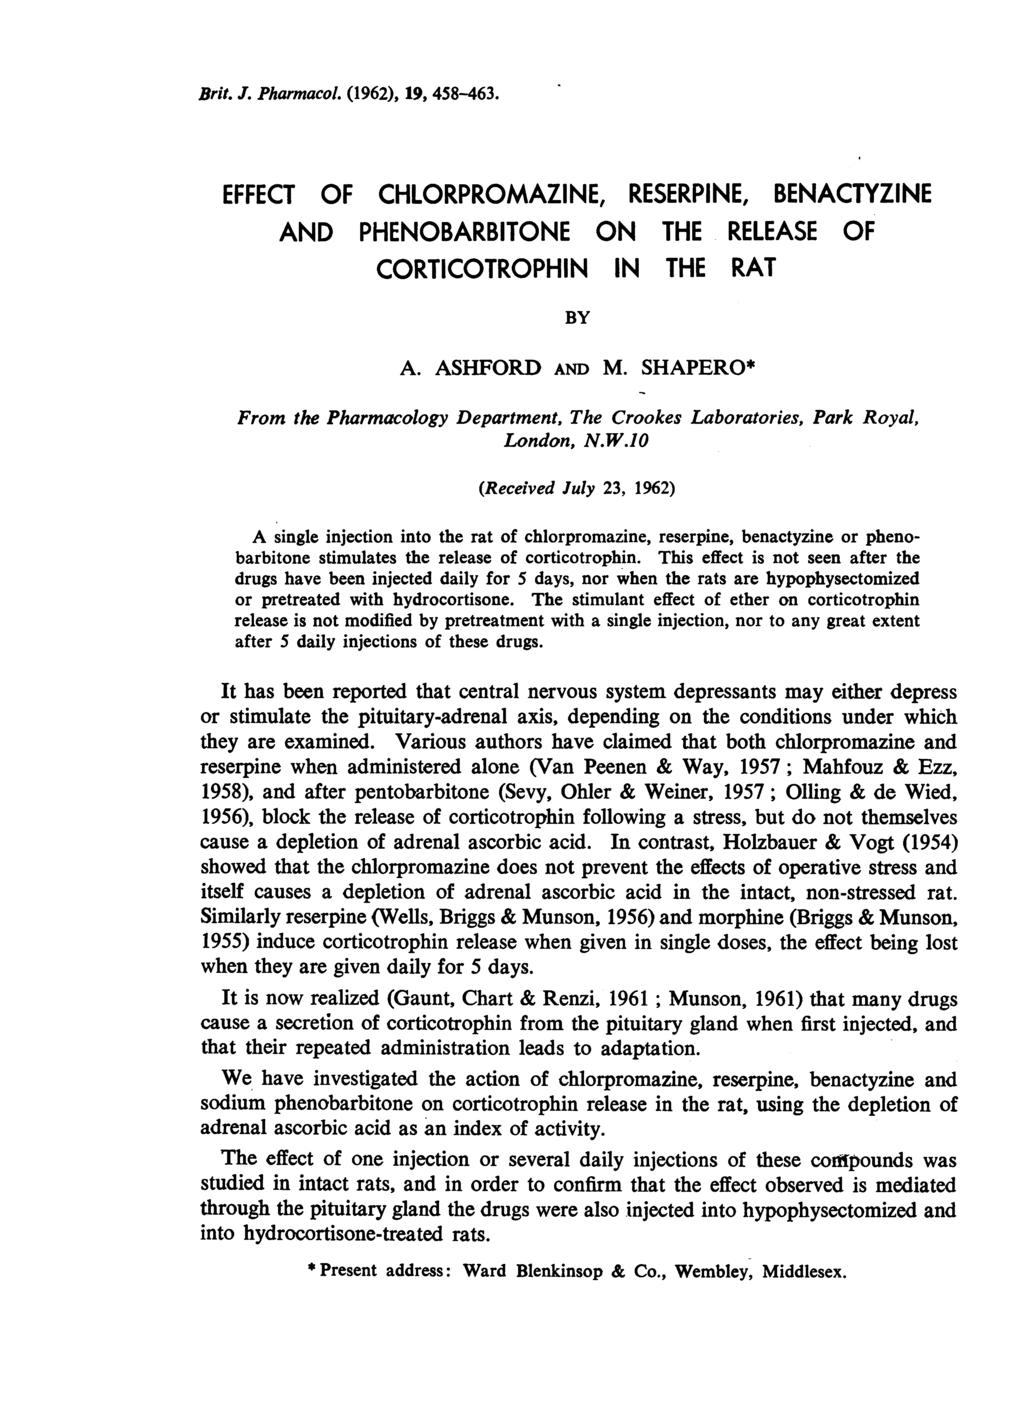 Brit. J. Pharmacol. (1962), 19, 458-463. EFFECT OF CHLORPROMAZNE, RESERPNE, BENACTYZNE AND PHENOBARBTONE ON THE RELEASE OF CORTCOTROPHN N THE RAT BY A. ASHFORD AND M.